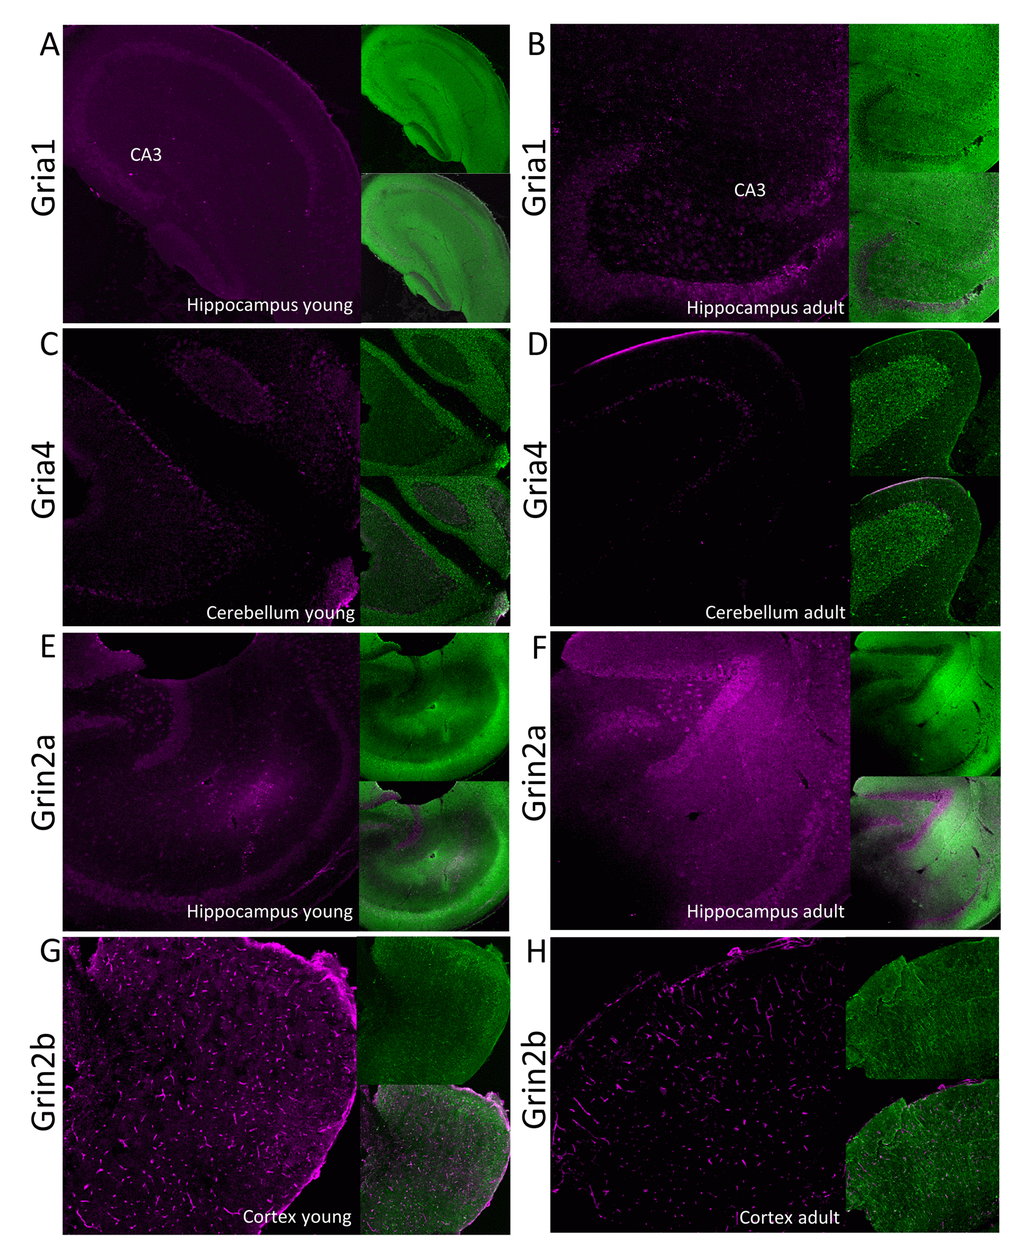 Immunofluorescent localization of selected glutamate ionotropic receptors which expression is altered by aging. Panels A-D show expression of AMPA receptor subunits: Gria1 (A and B) and Gria4 (C and D) in, respectively, hippocampus and cerebellum. Panels E-H show fluorescent signal associated with NMDA receptor subunits: Grin2a (E and F) and Grin2b (G and H) in, respectively, hippocampus and cortex. Panels A, C, E and G show the receptors localization in young, while the right panels (B, D, F and H) in aged animals. In each panel, the fluorescence related to studied proteins is shown in magenta (left images), the signal associated with MAP-2 protein is green (right upper image) and the merged image is presented in the left bottom image. CA3 – Cornu Ammonis area of hippocampus containing pyramidal neurons.